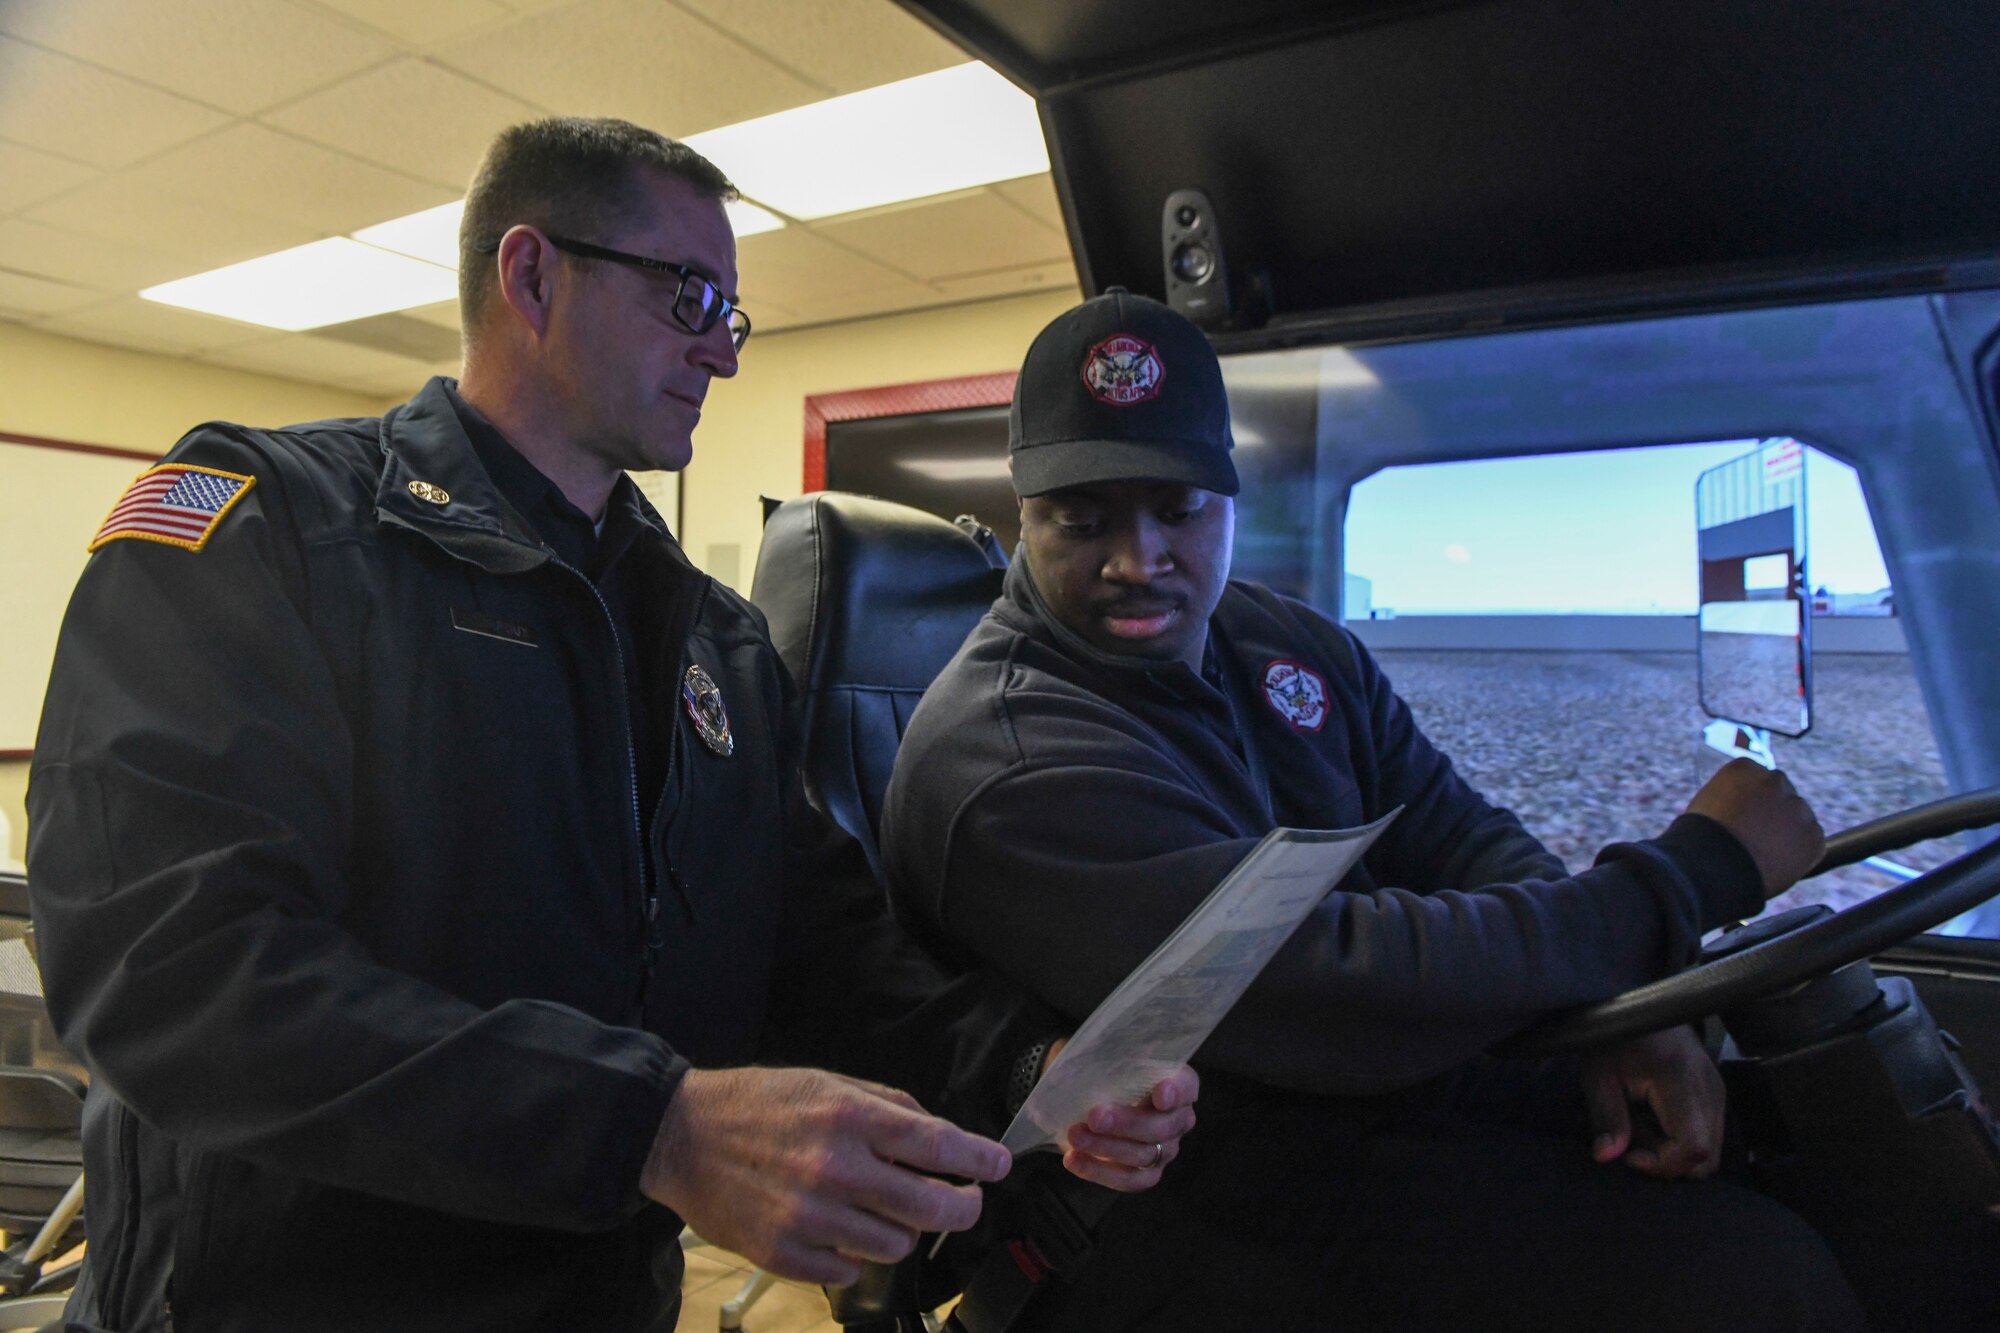 Philip Fourroux, the fire chief assigned to the 97th Air Mobility Wing Fire department, shows Jonathan Matthews, a firefighter assigned to the 97th AMW Fire Department, the directions to his destination before he operates a driving simulator, Jan. 15, 2019, at Altus Air Force Base, Okla. The simulator is one of three that allow the 97th AMW firefighters to train indoors on firefighting techniques, operating a water pump and driving various vehicles. (U.S. Air Force photo by Airman 1st Class Jeremy Wentworth)